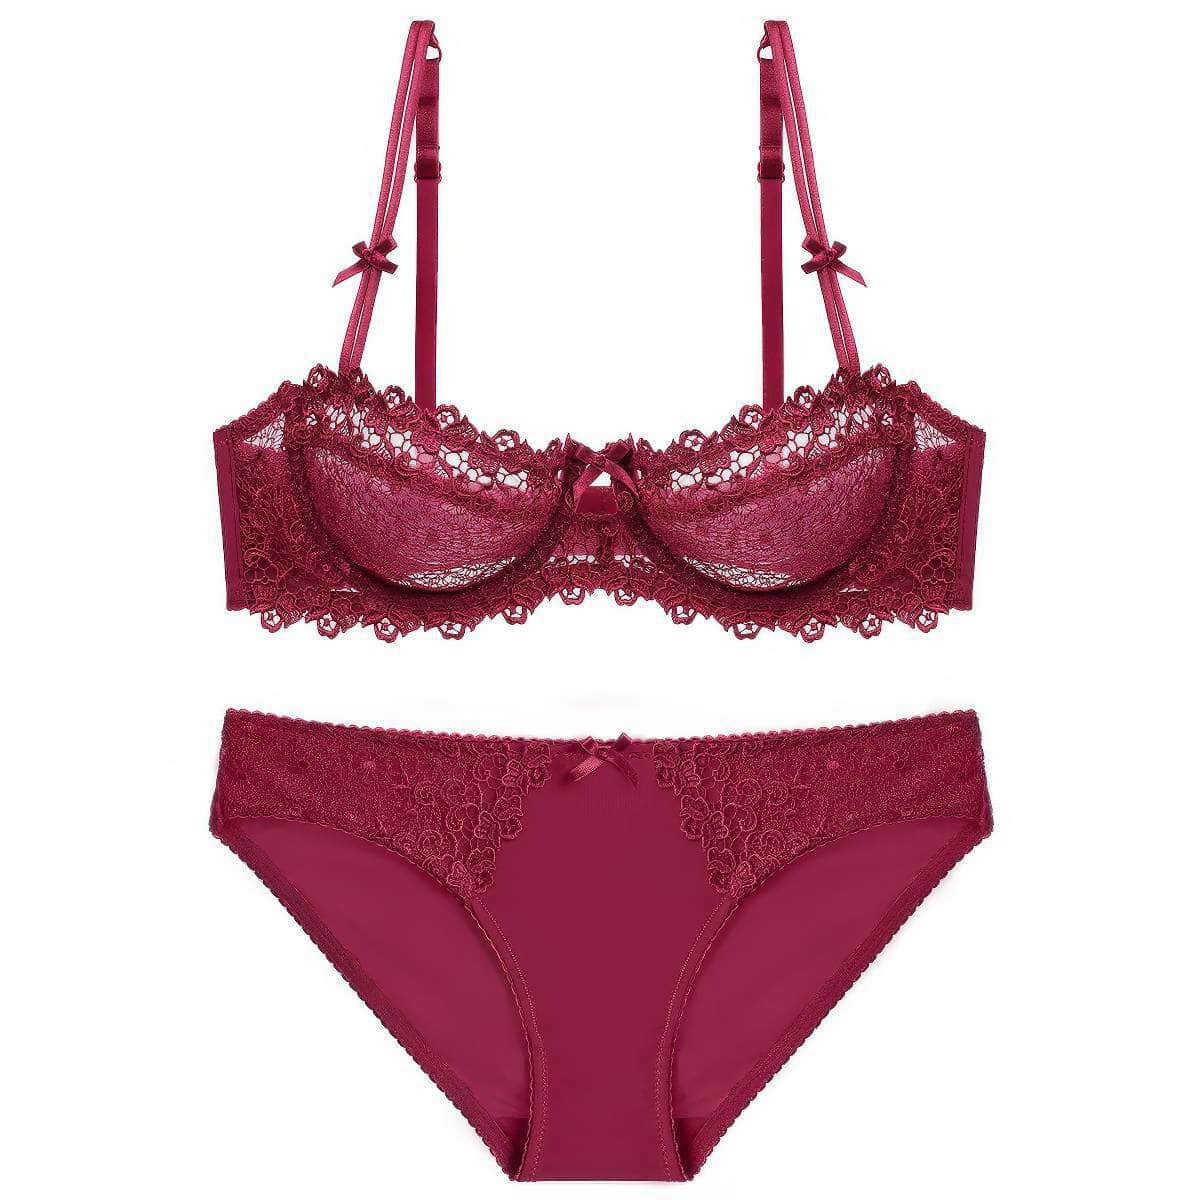 Trimmed Floral Embroidered Double Strap Bra Panty Set 80D / Maroon